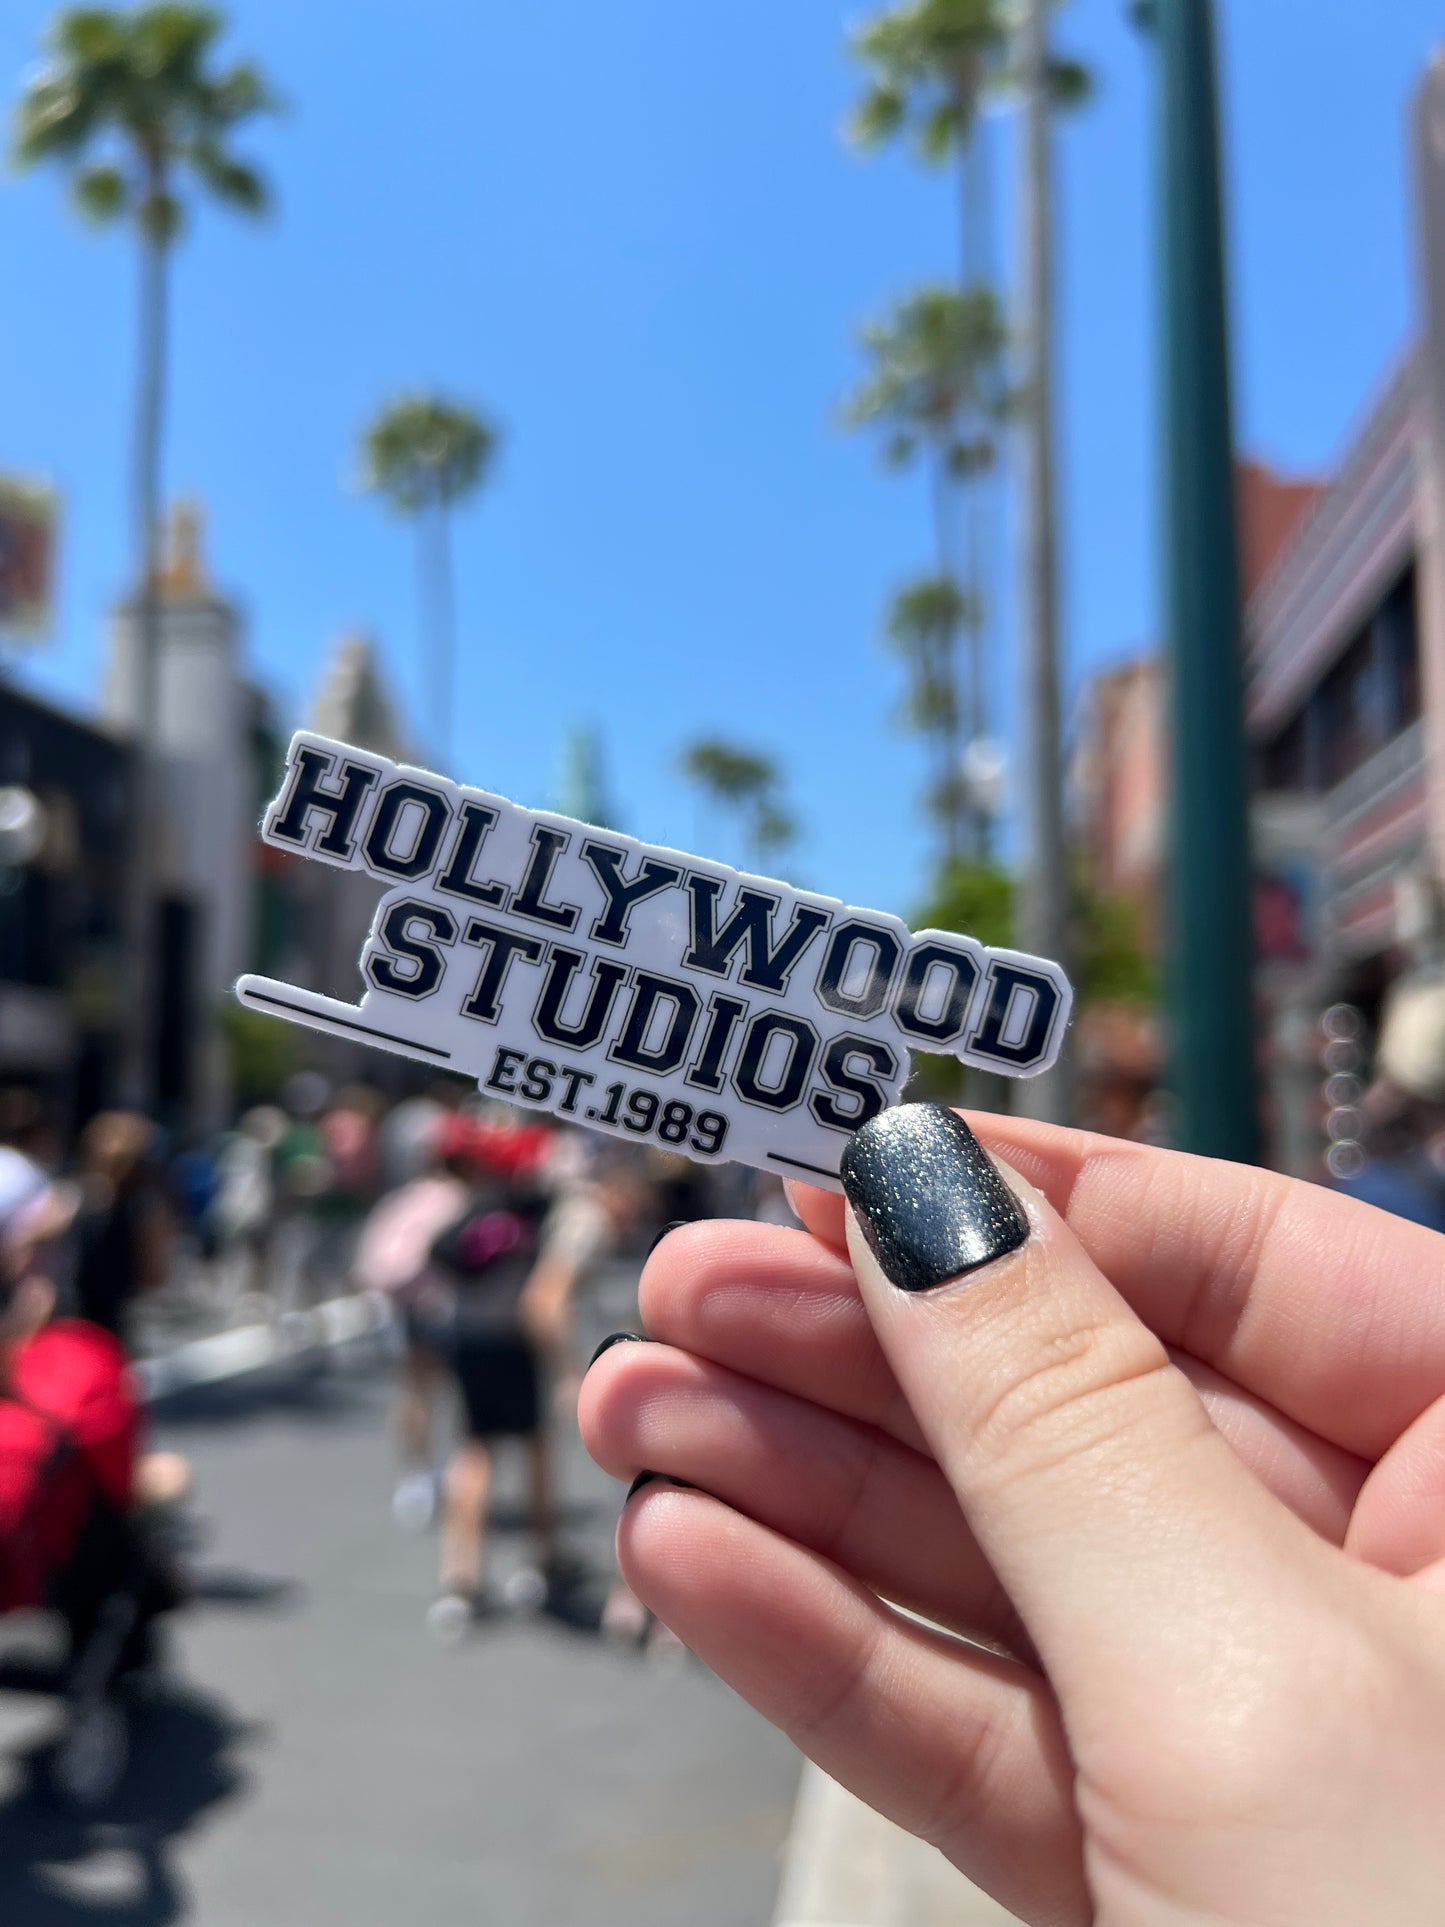 Disney Park Year Collection - Hollywood Studios Sticker